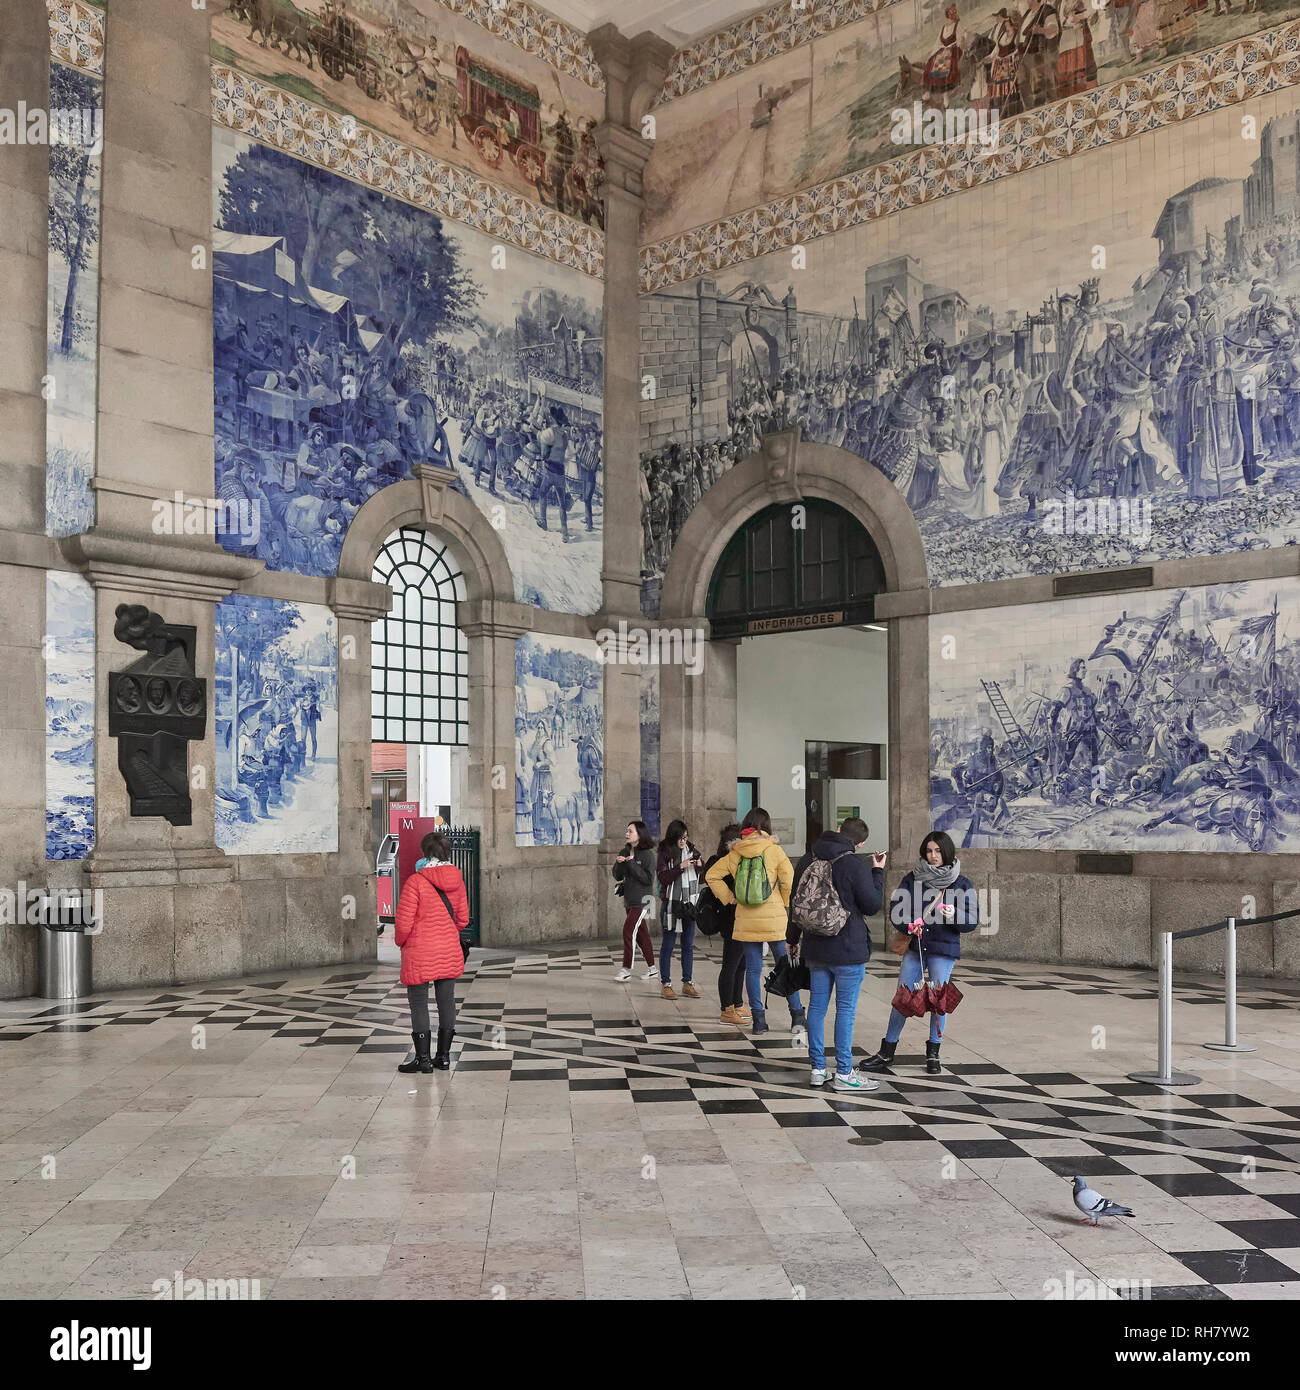 Hall of the San Bento train station decorated with blue tiles, an account of the history of Portugal in the city of Porto Stock Photo